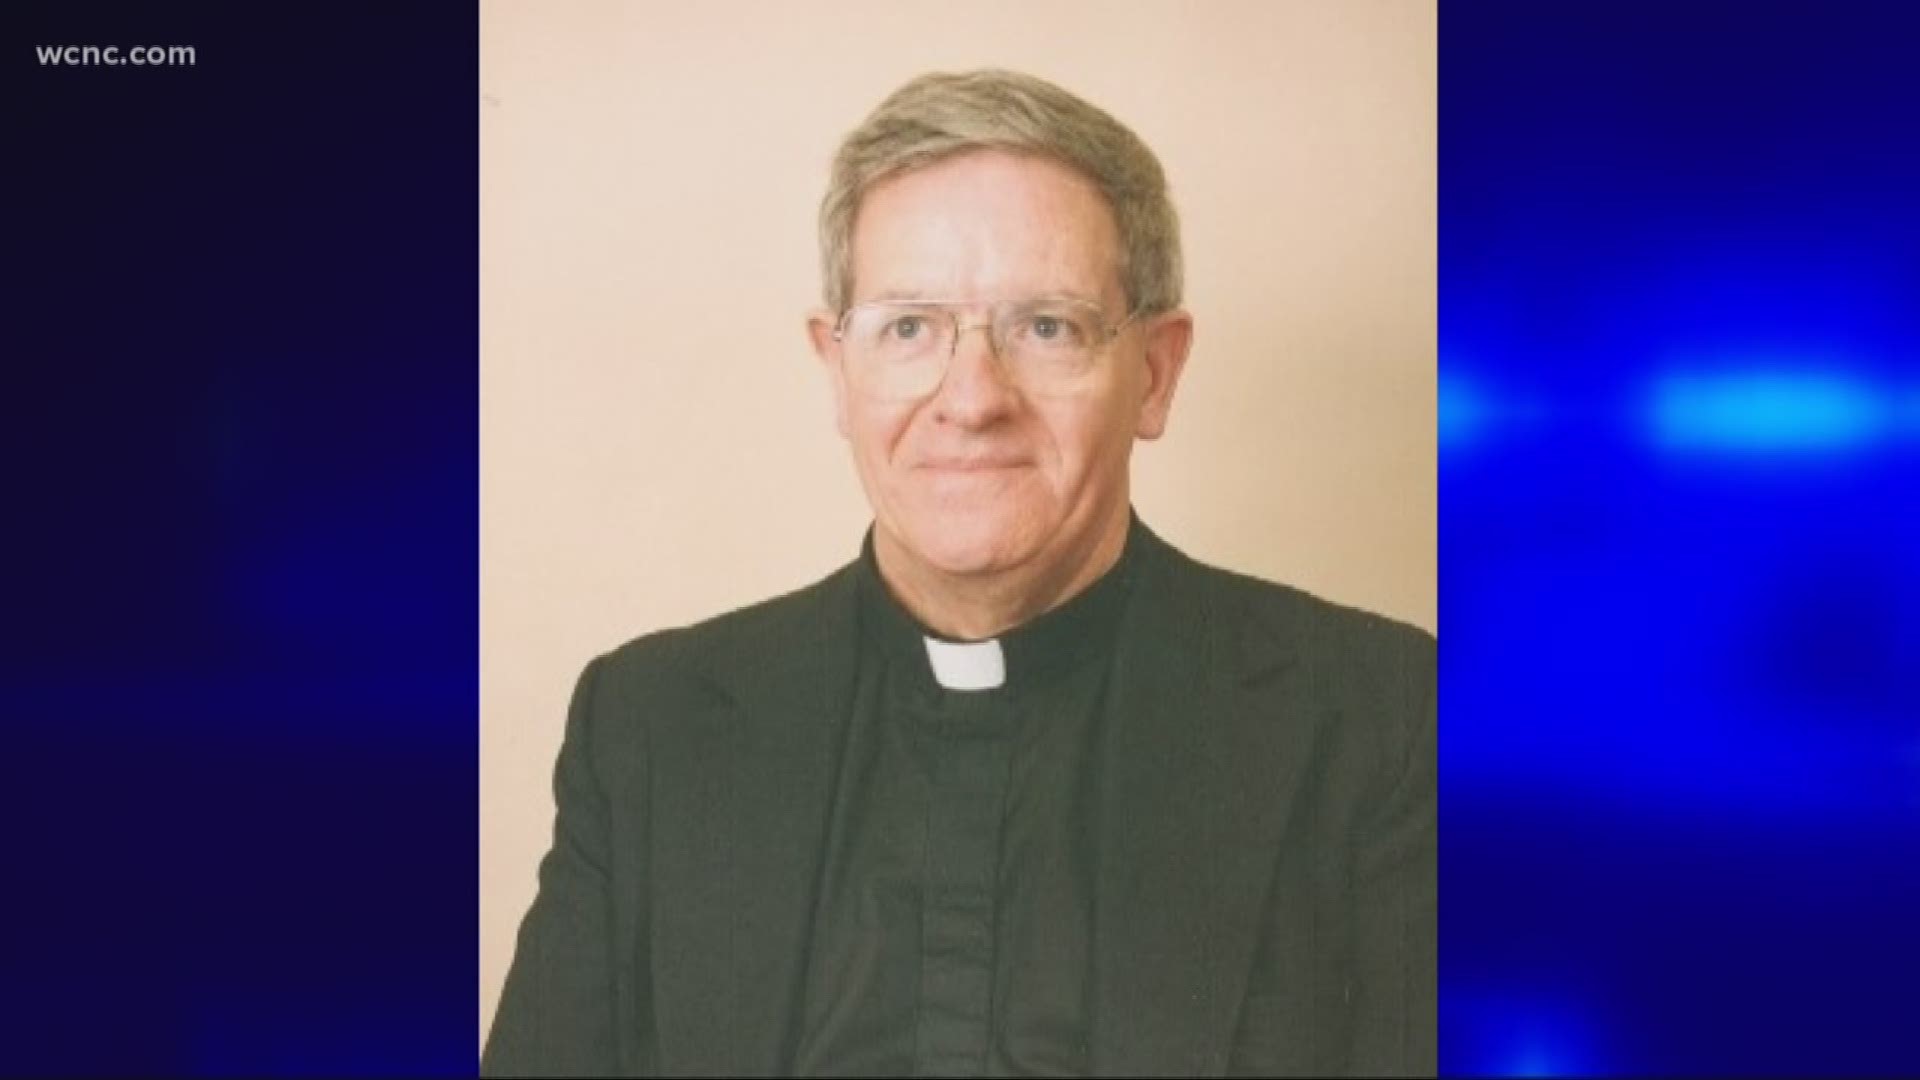 Documents show the Catholic Diocese of Charlotte knew about sexual abuse allegations 20 years before suspending the priest in question.  NBC Charlotte and other media outlets are trying to unseal additional documents related to the allegations.